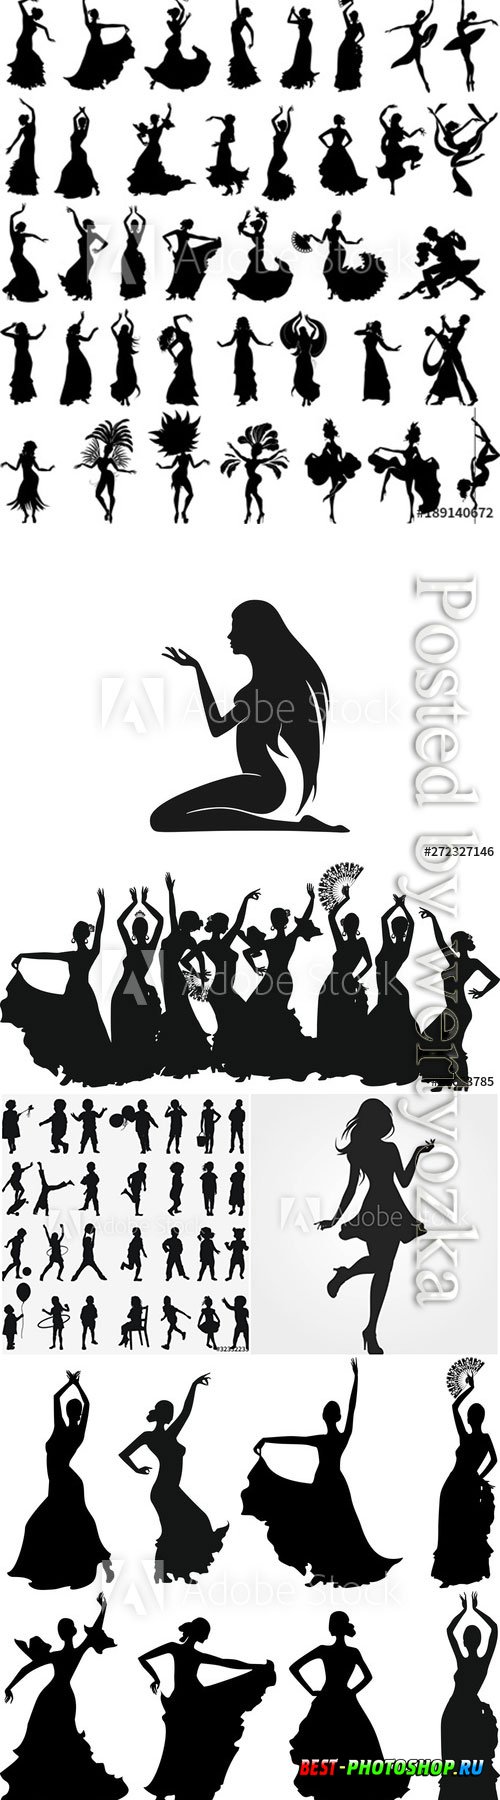 People silhouettes in vector